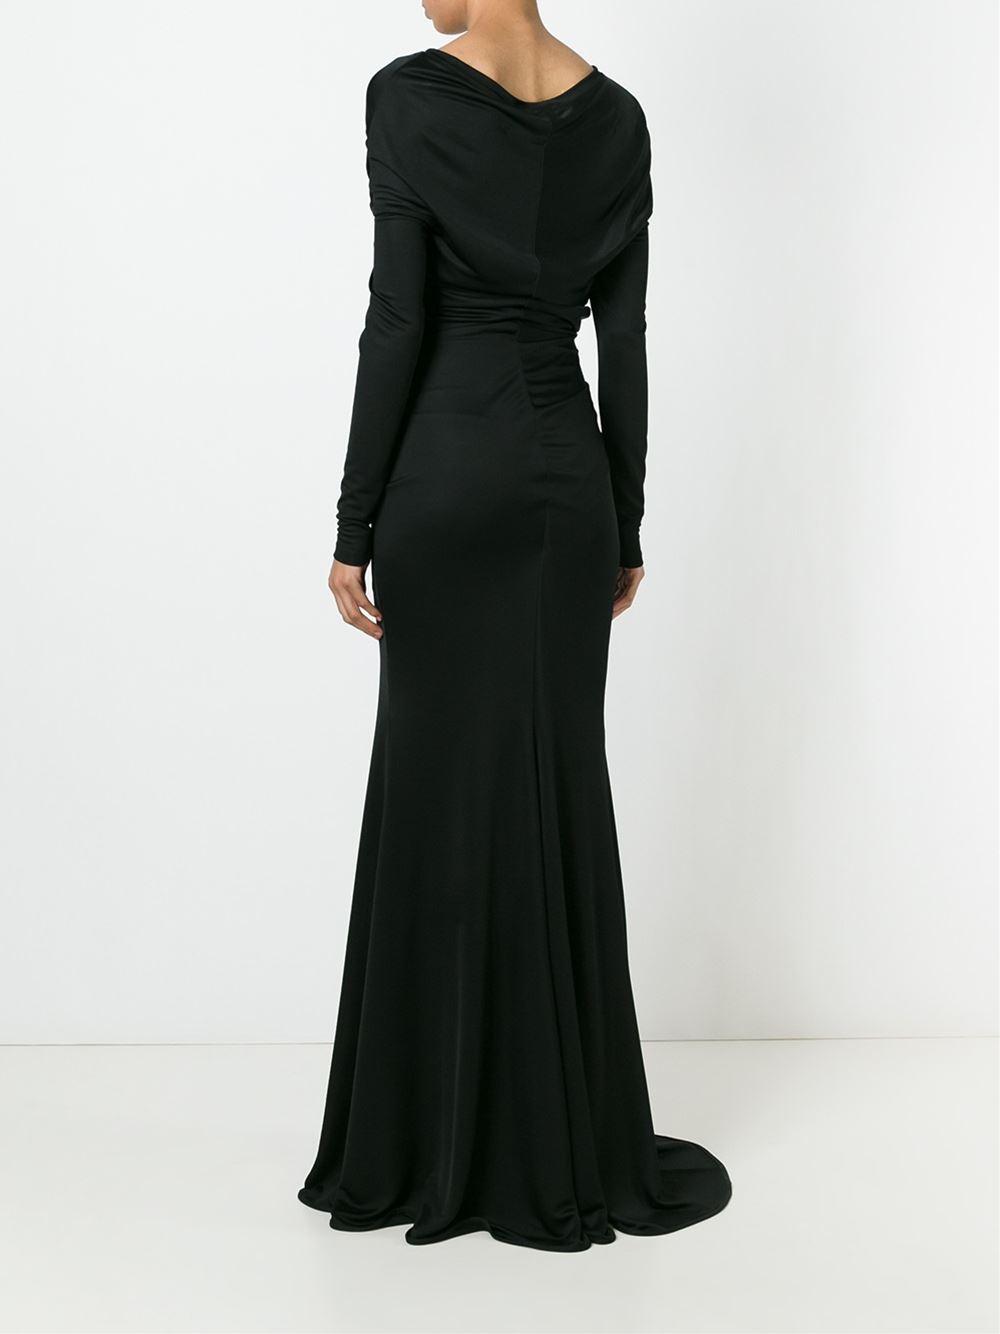 Lyst - Givenchy Gathered Cascading Gown in Black